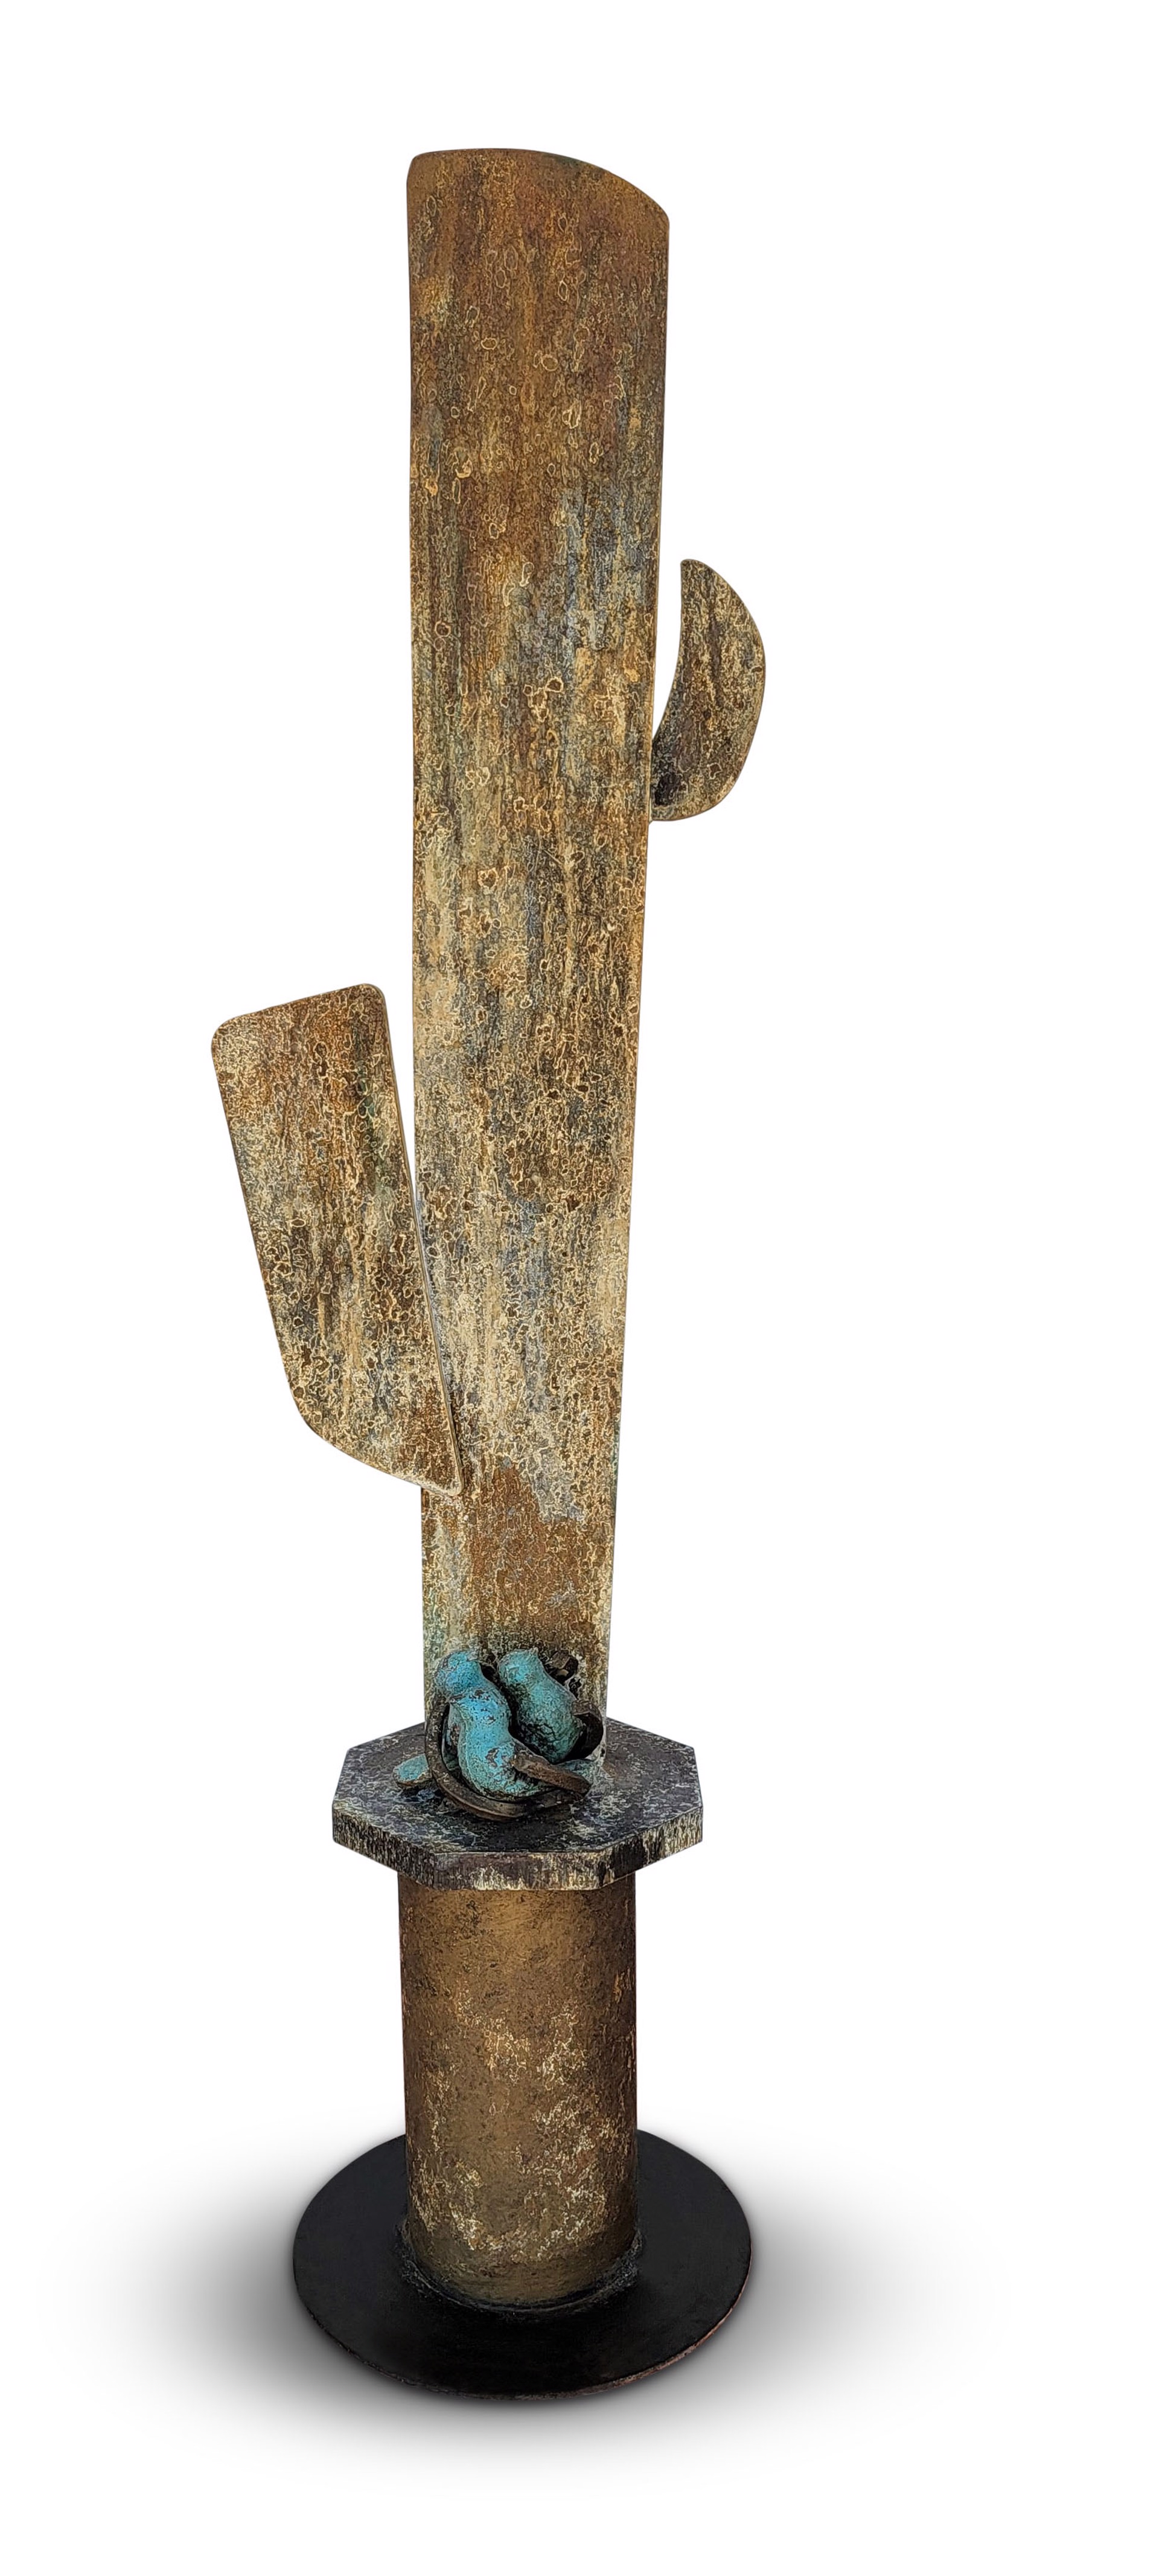 Small Pedestal Saguaro ~ Copper with Baby Birds by Pamela Ambrosio